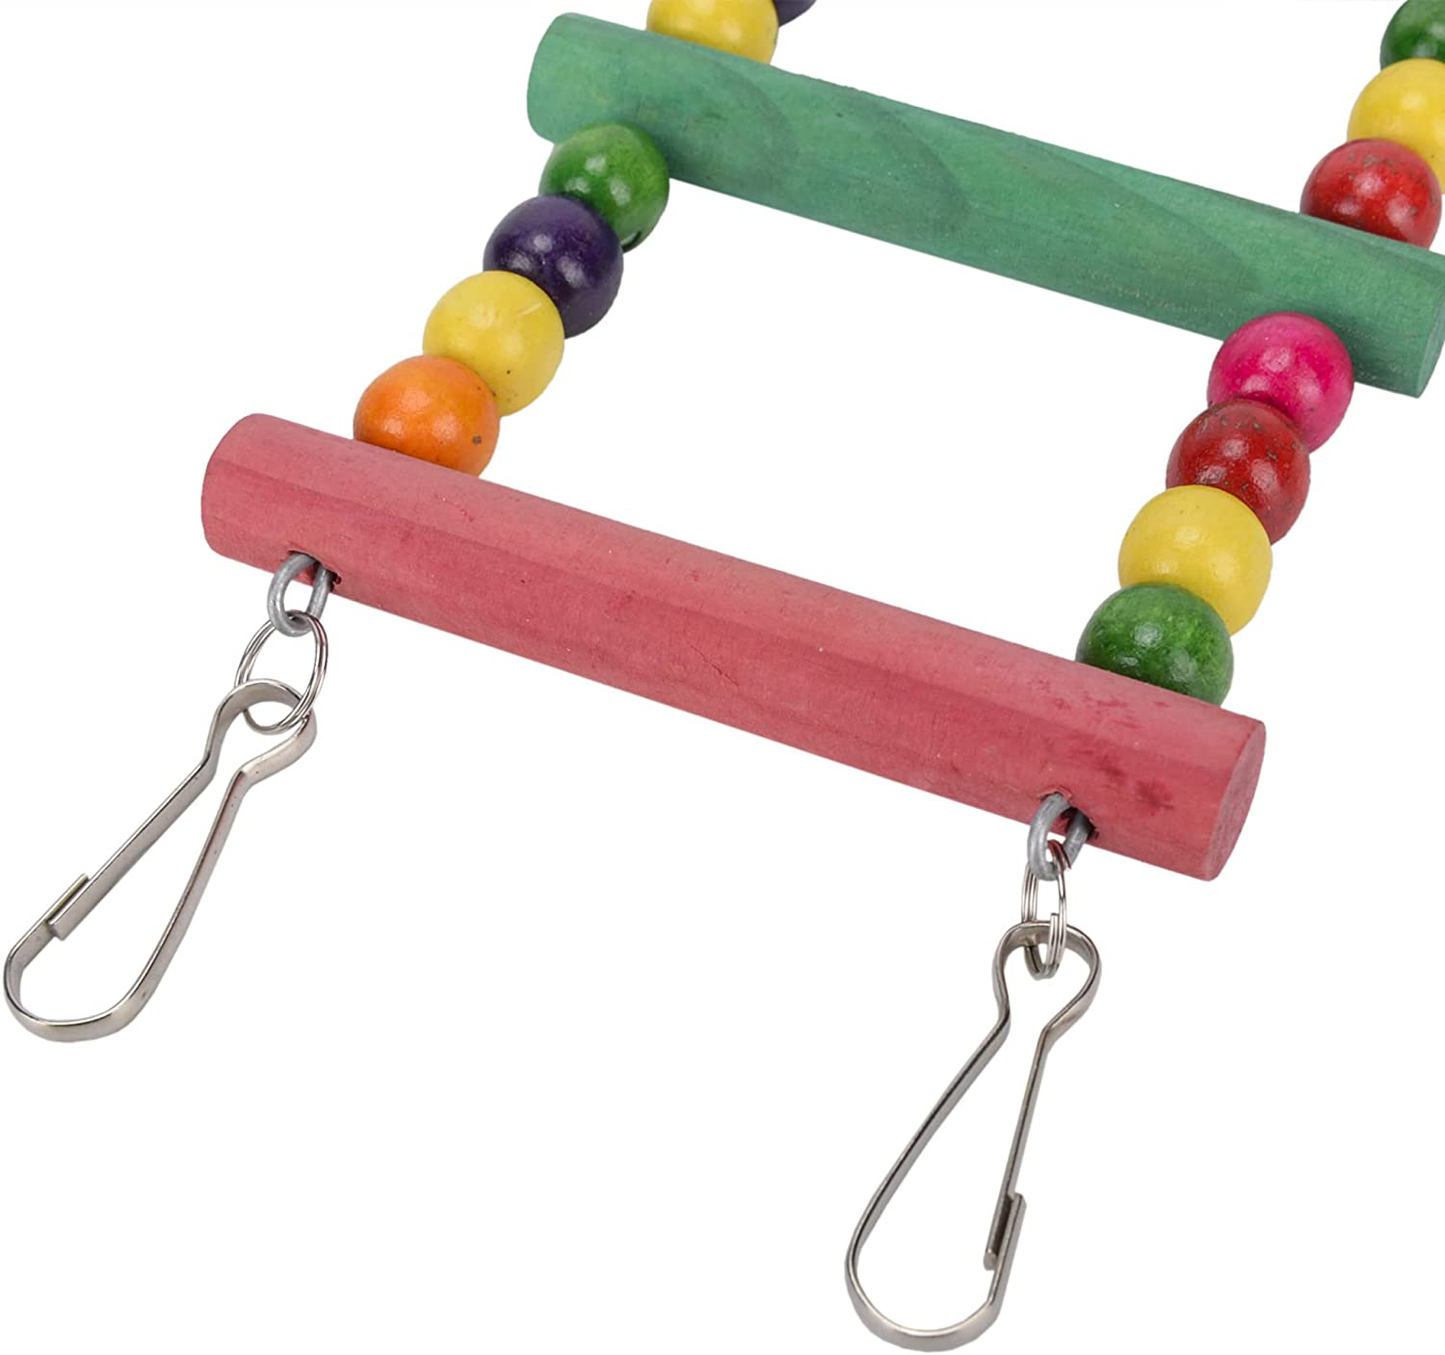 Uheng Colorful Bird Ladder Toys for Parrot, Pet Swings Chew Hanging Bridge, Wooden Rainbow Cage Training Accessories for Cockatiel Conure Parakeet Small Macaw Budgie